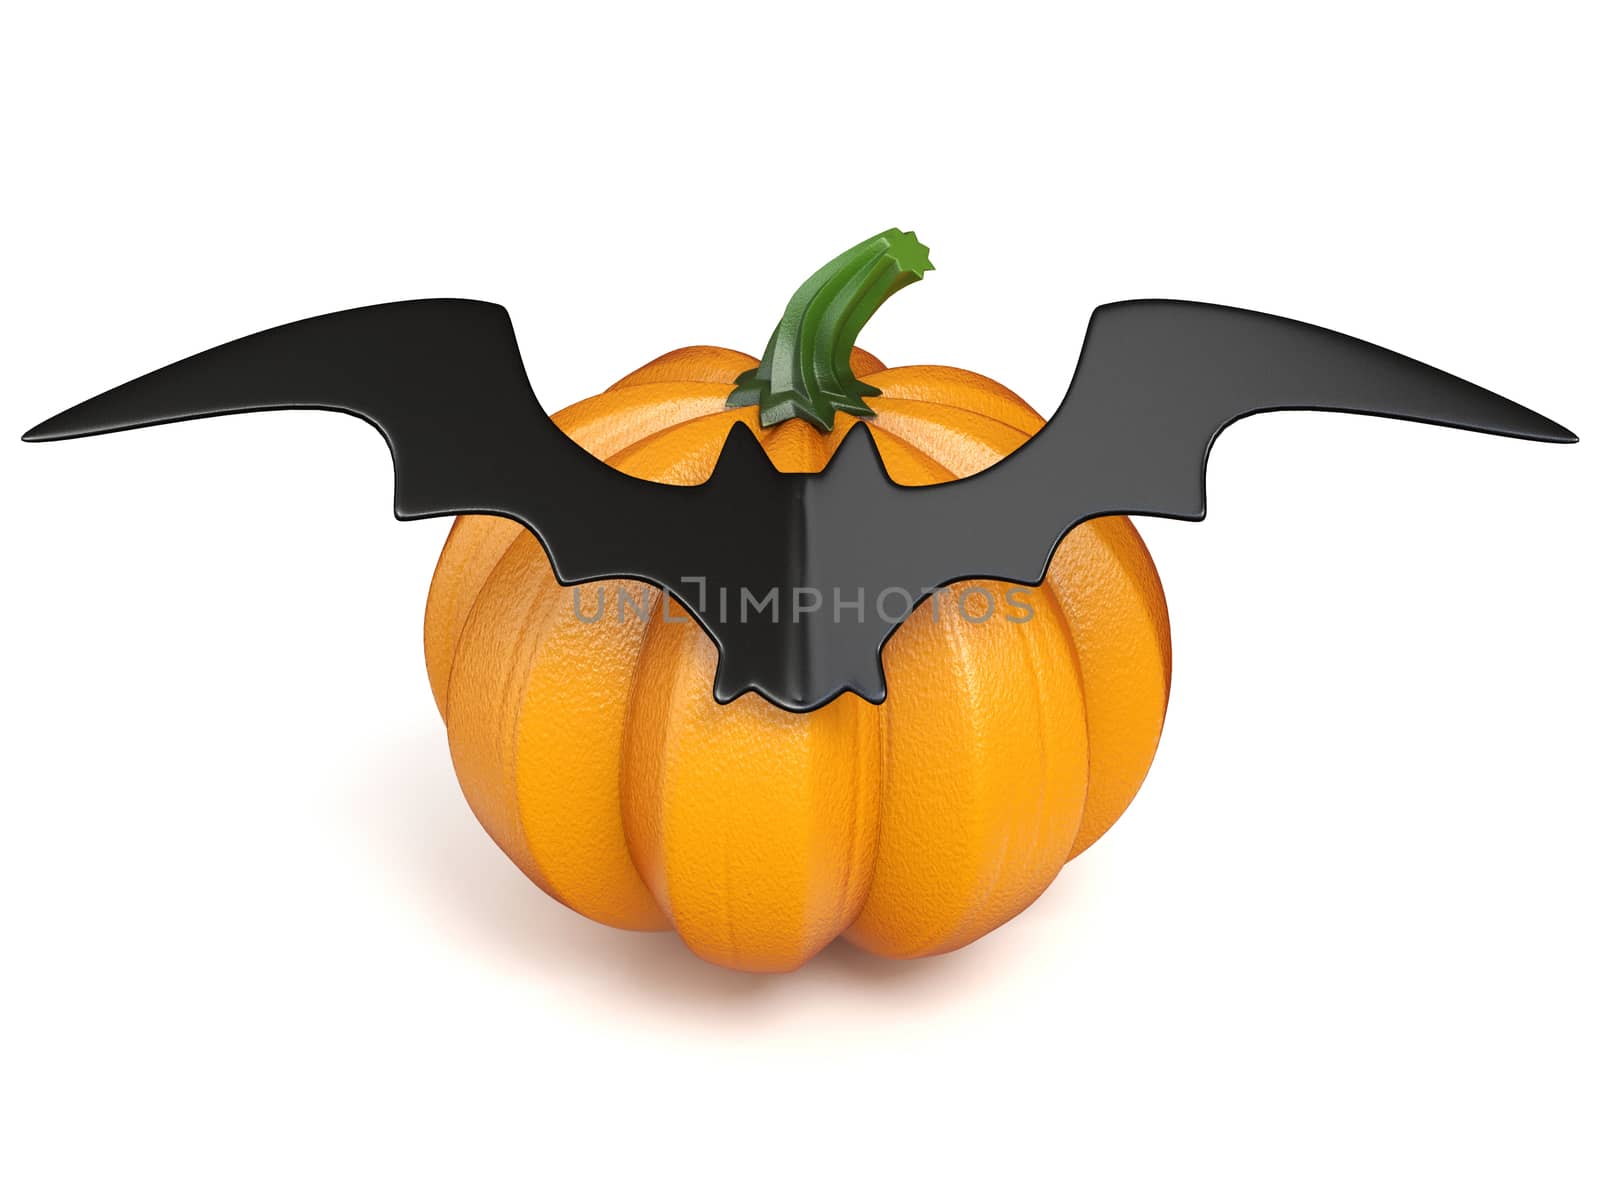 Pumpkin with black paper bat 3D rendering illustration isolated on white background